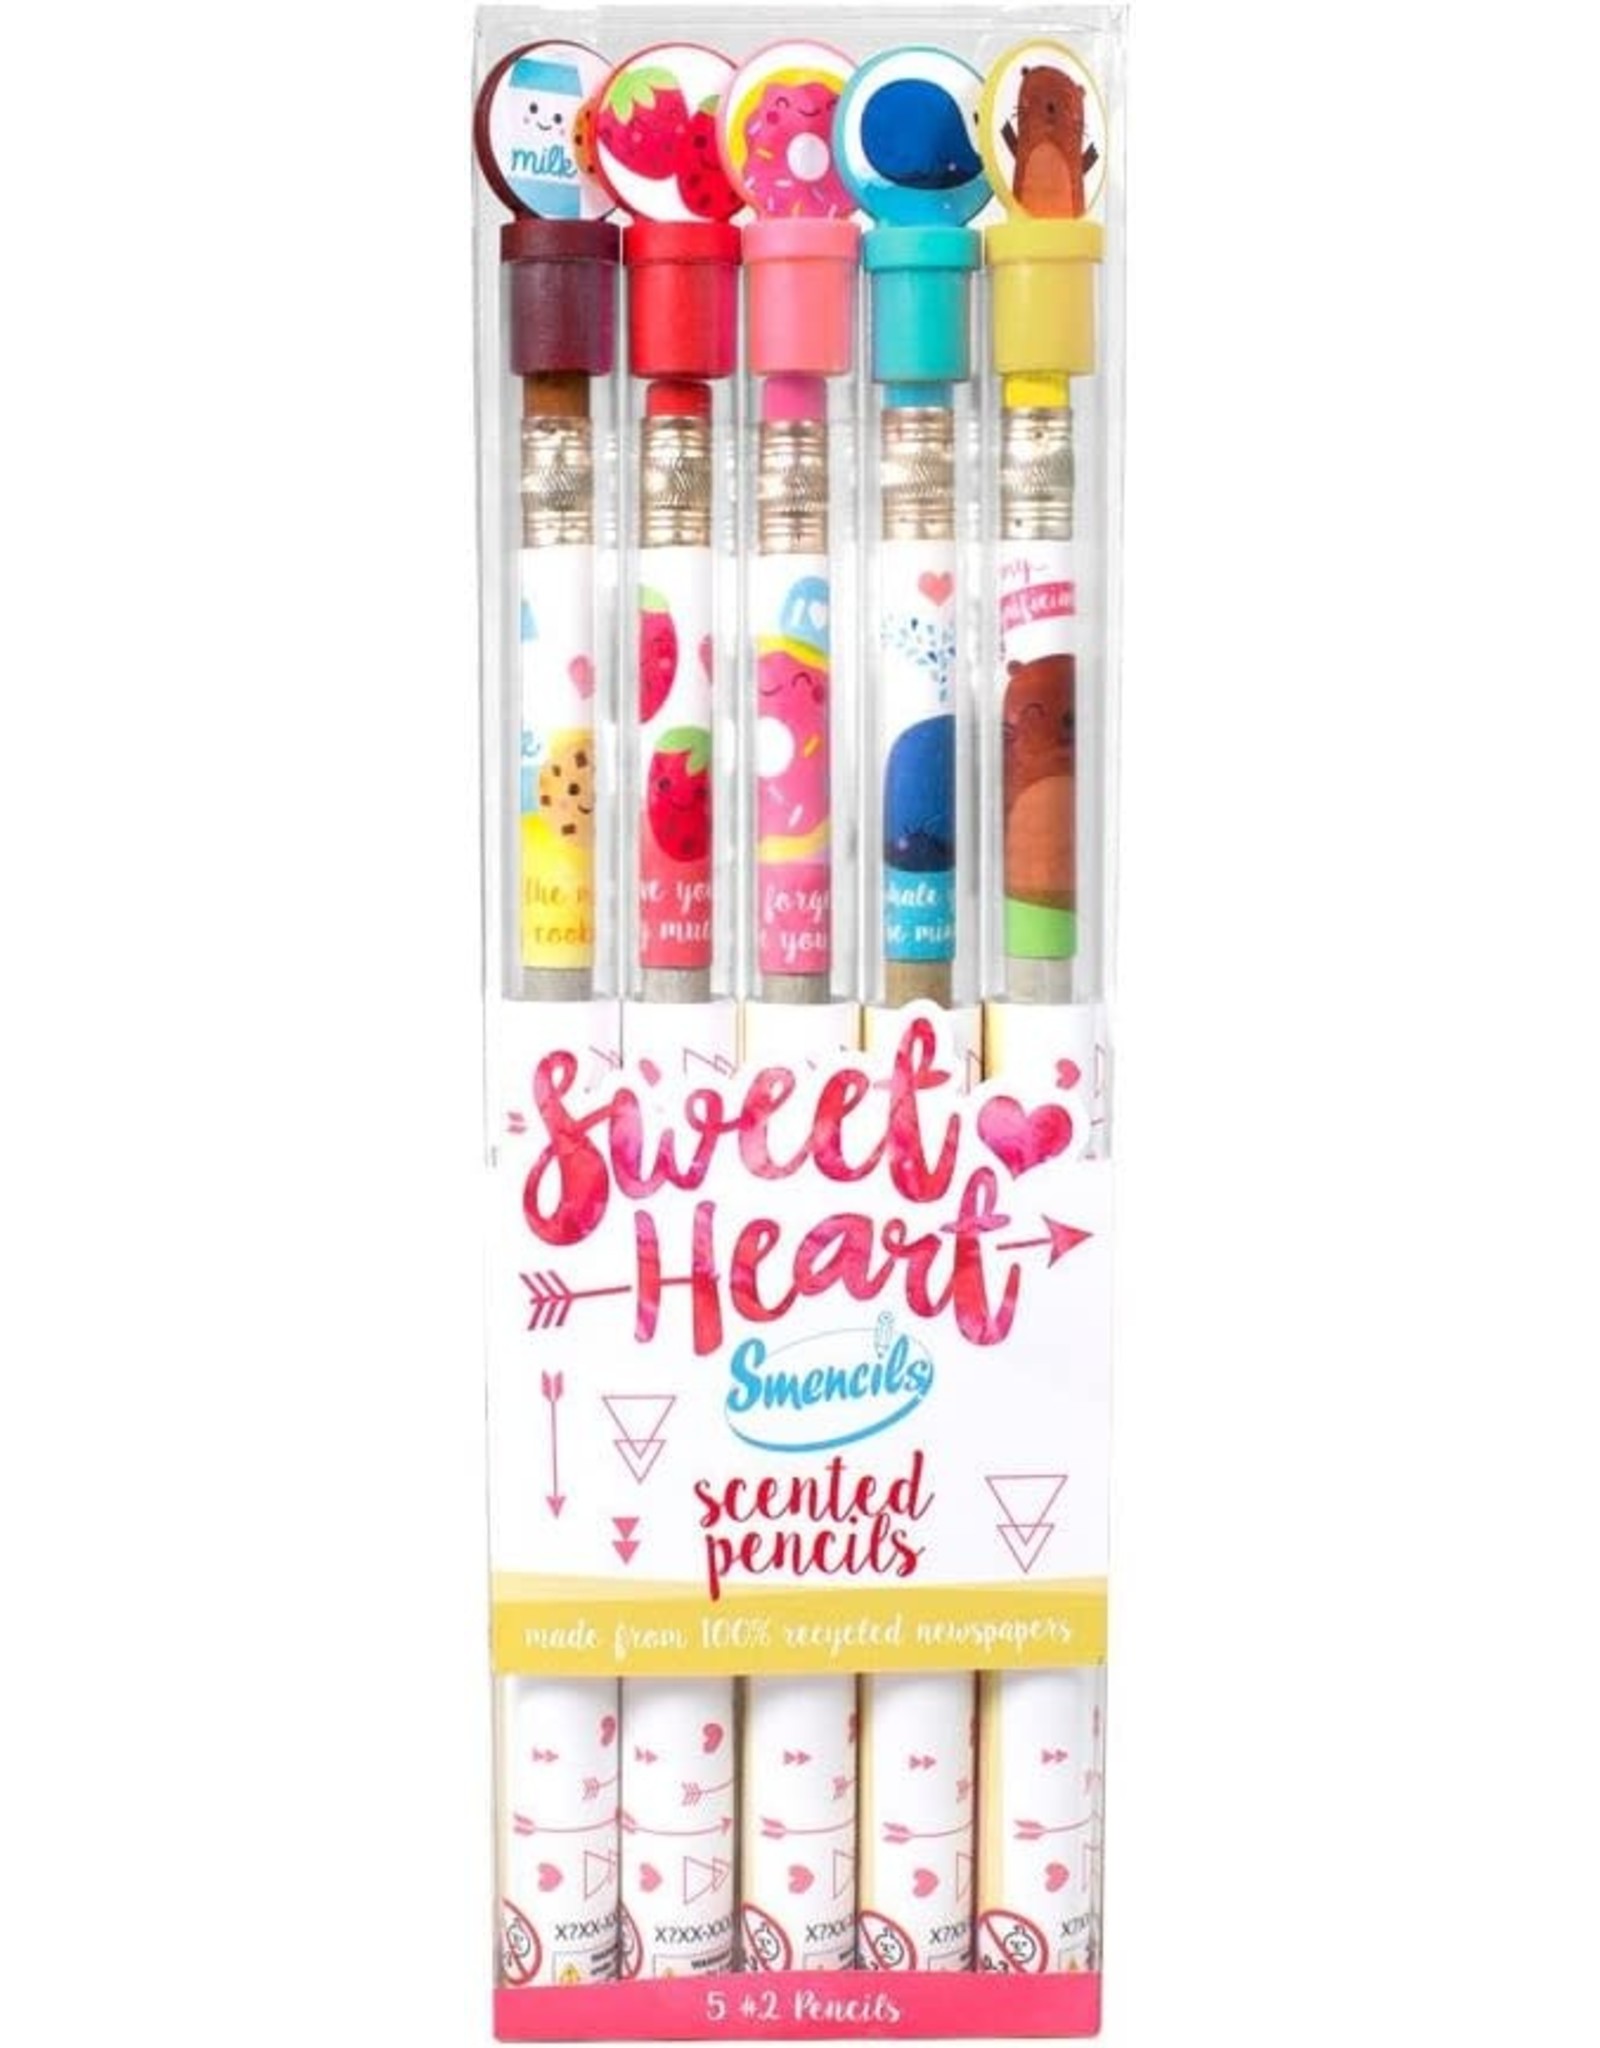 Sweetheart Smencils 5 Pack - Wit & Whimsy Toys